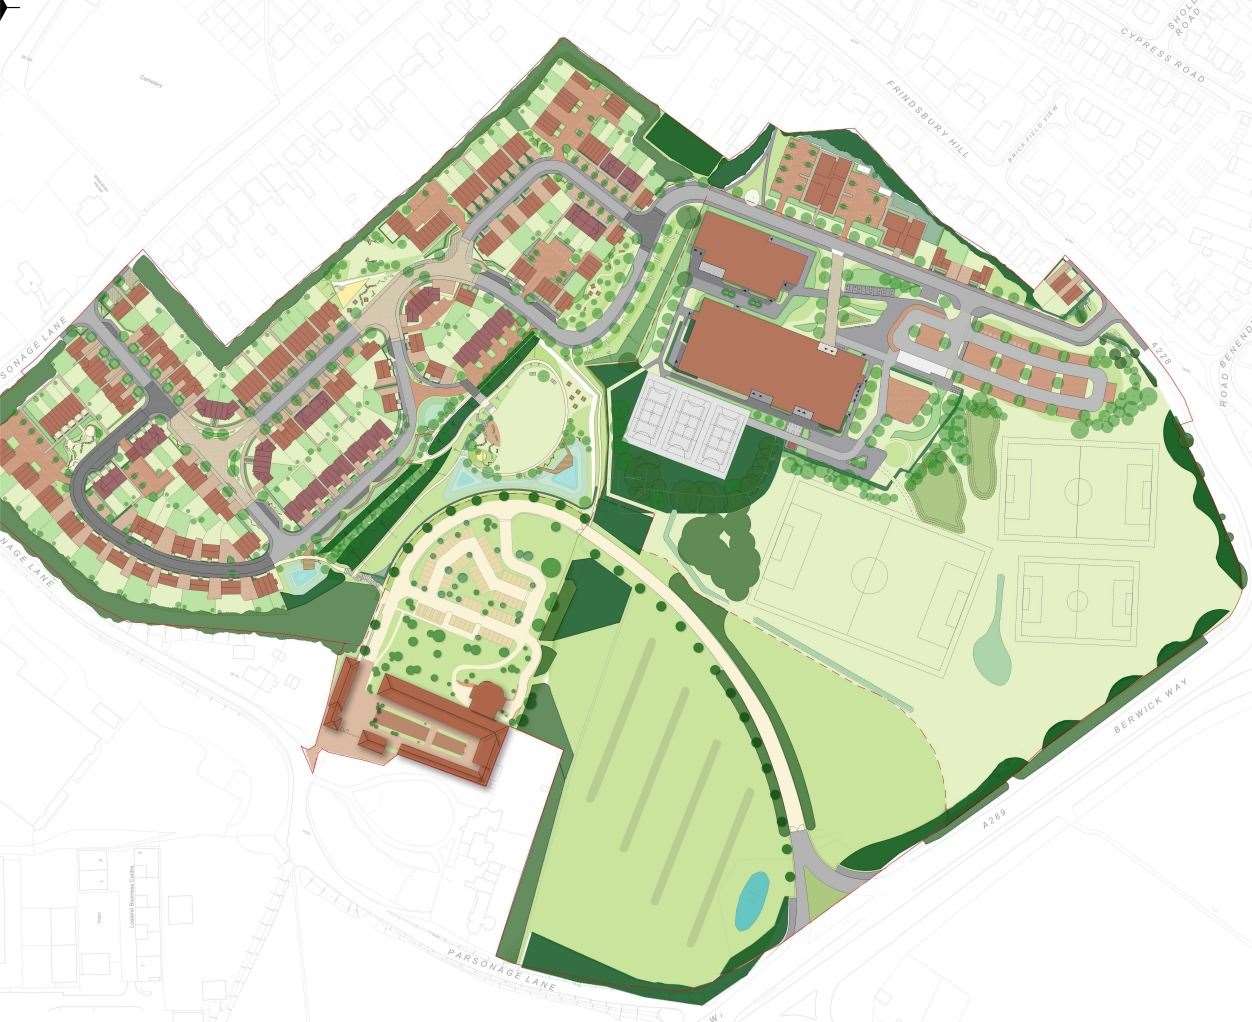 A site overview showing the secondary school, housing estate, and wedding venue. Picture: Ares Landscape Architects